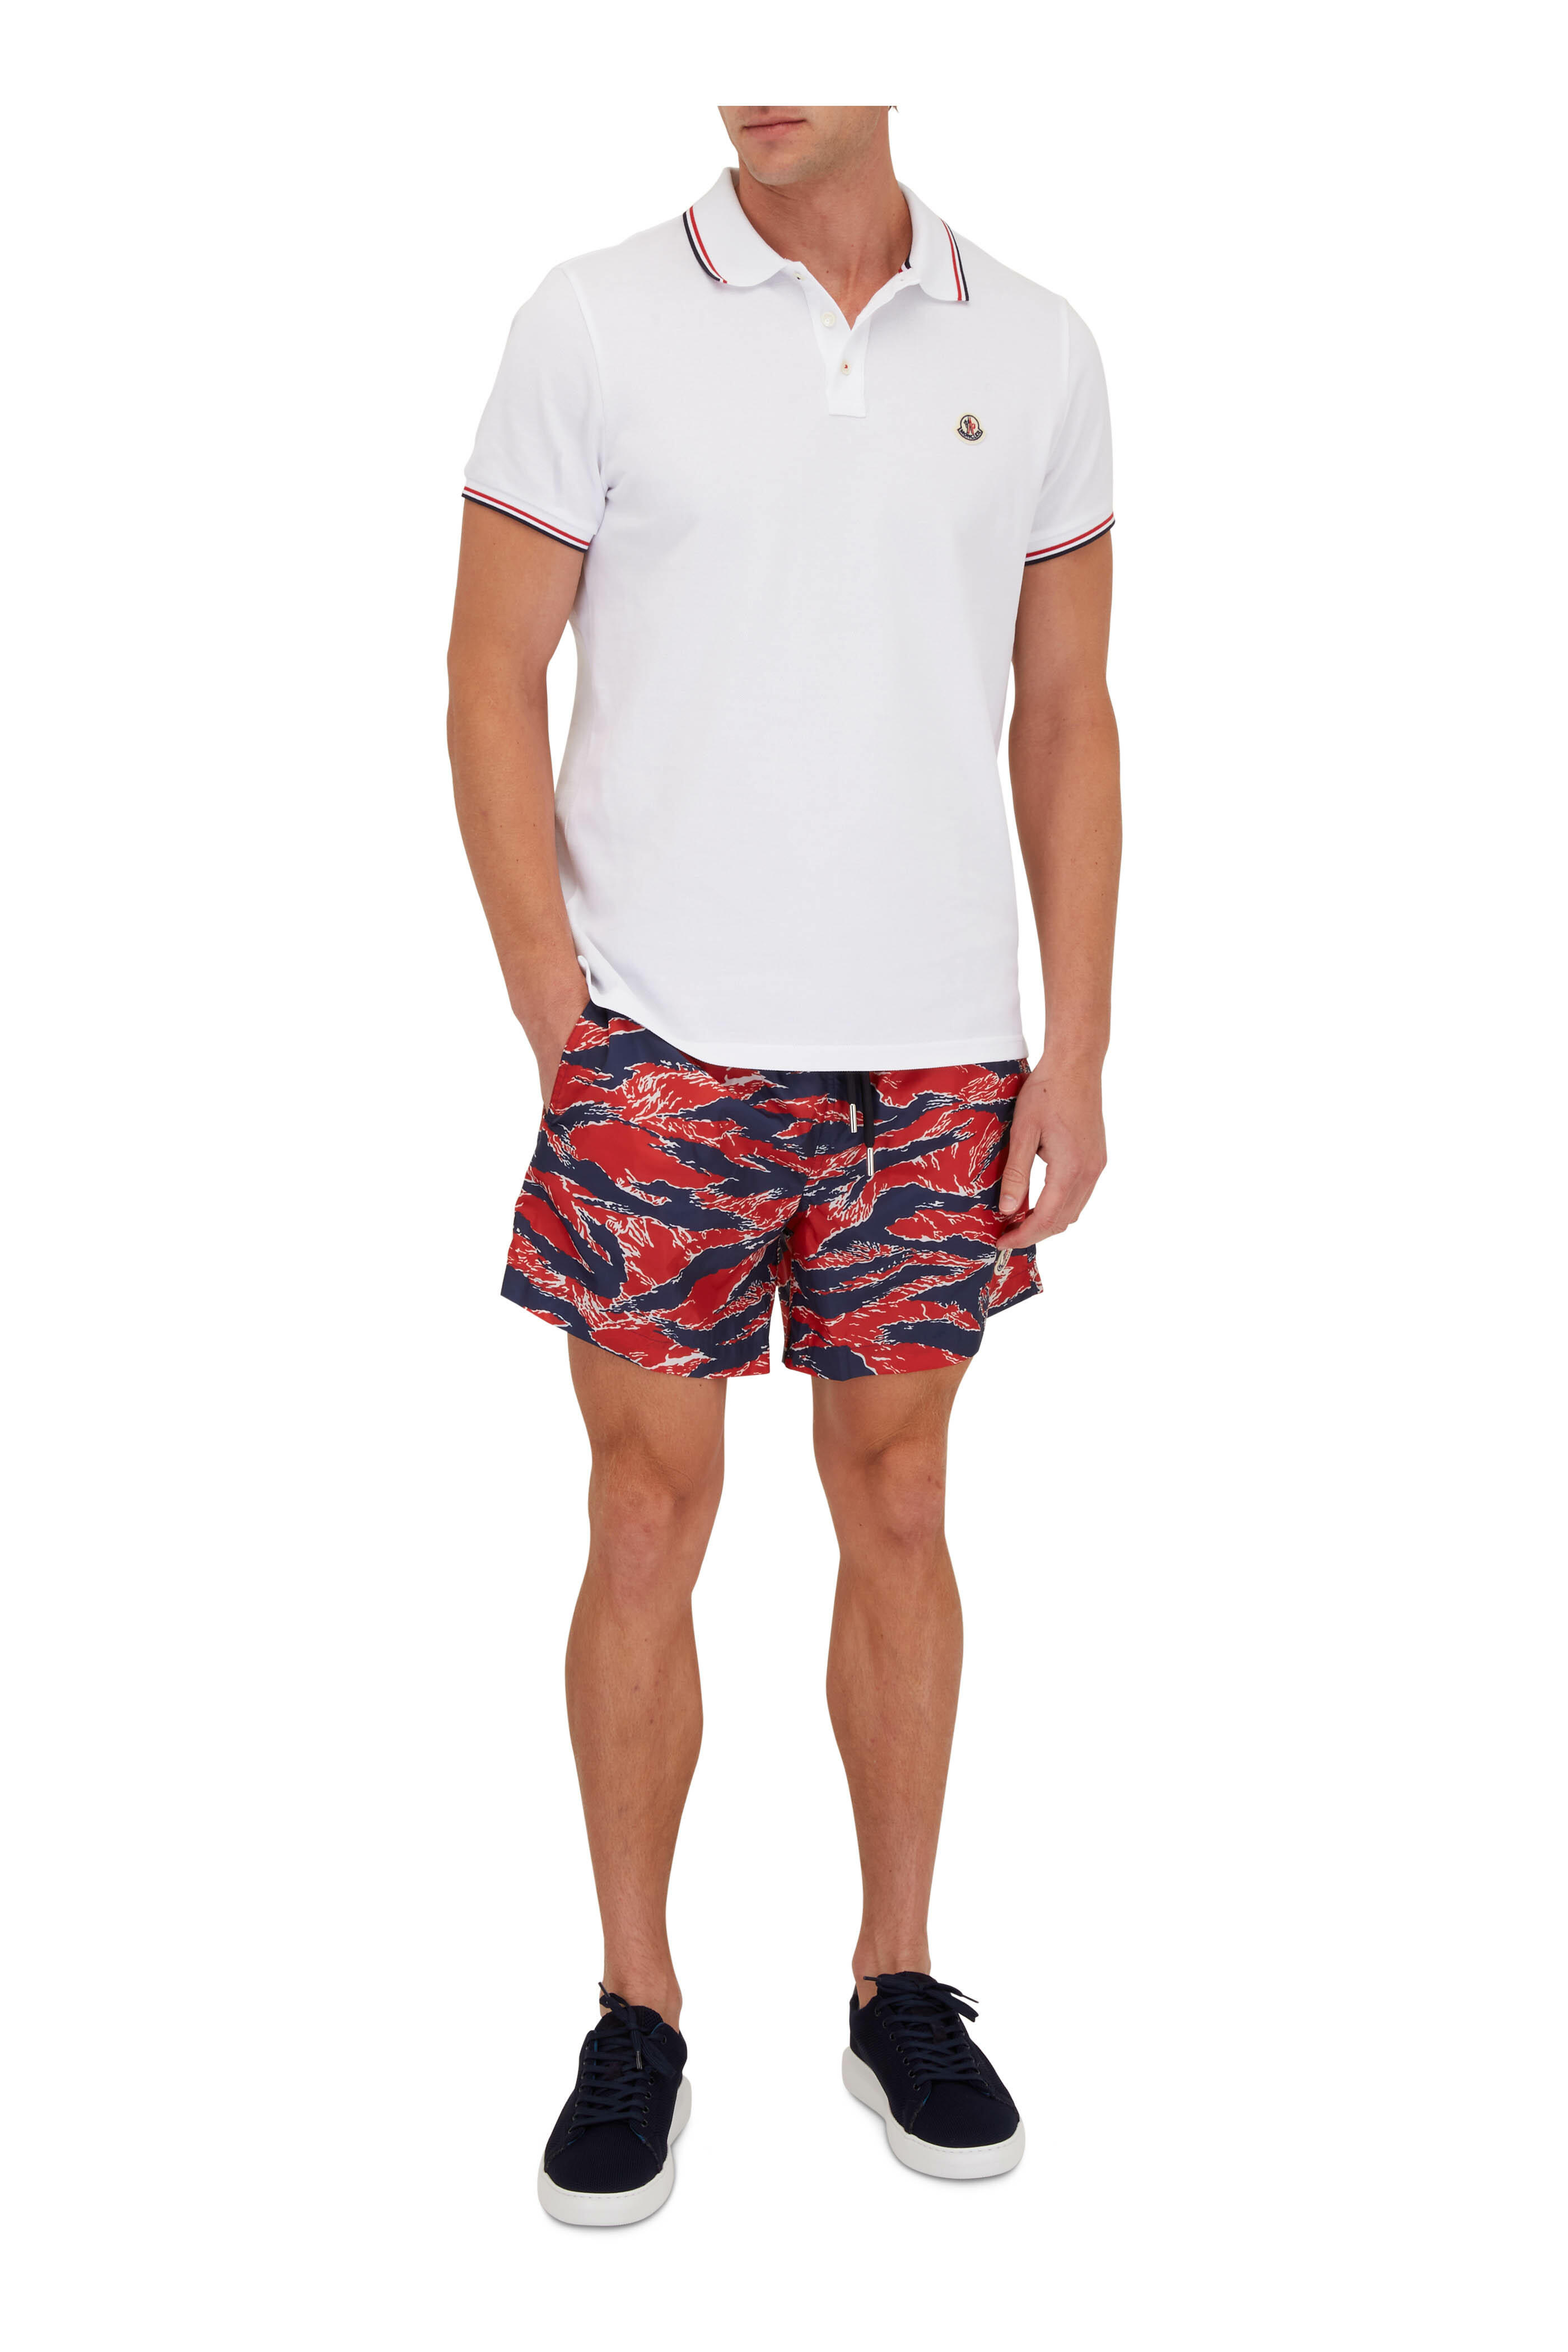 Moncler - Printed Red & Blue Swim Trunks | Mitchell Stores